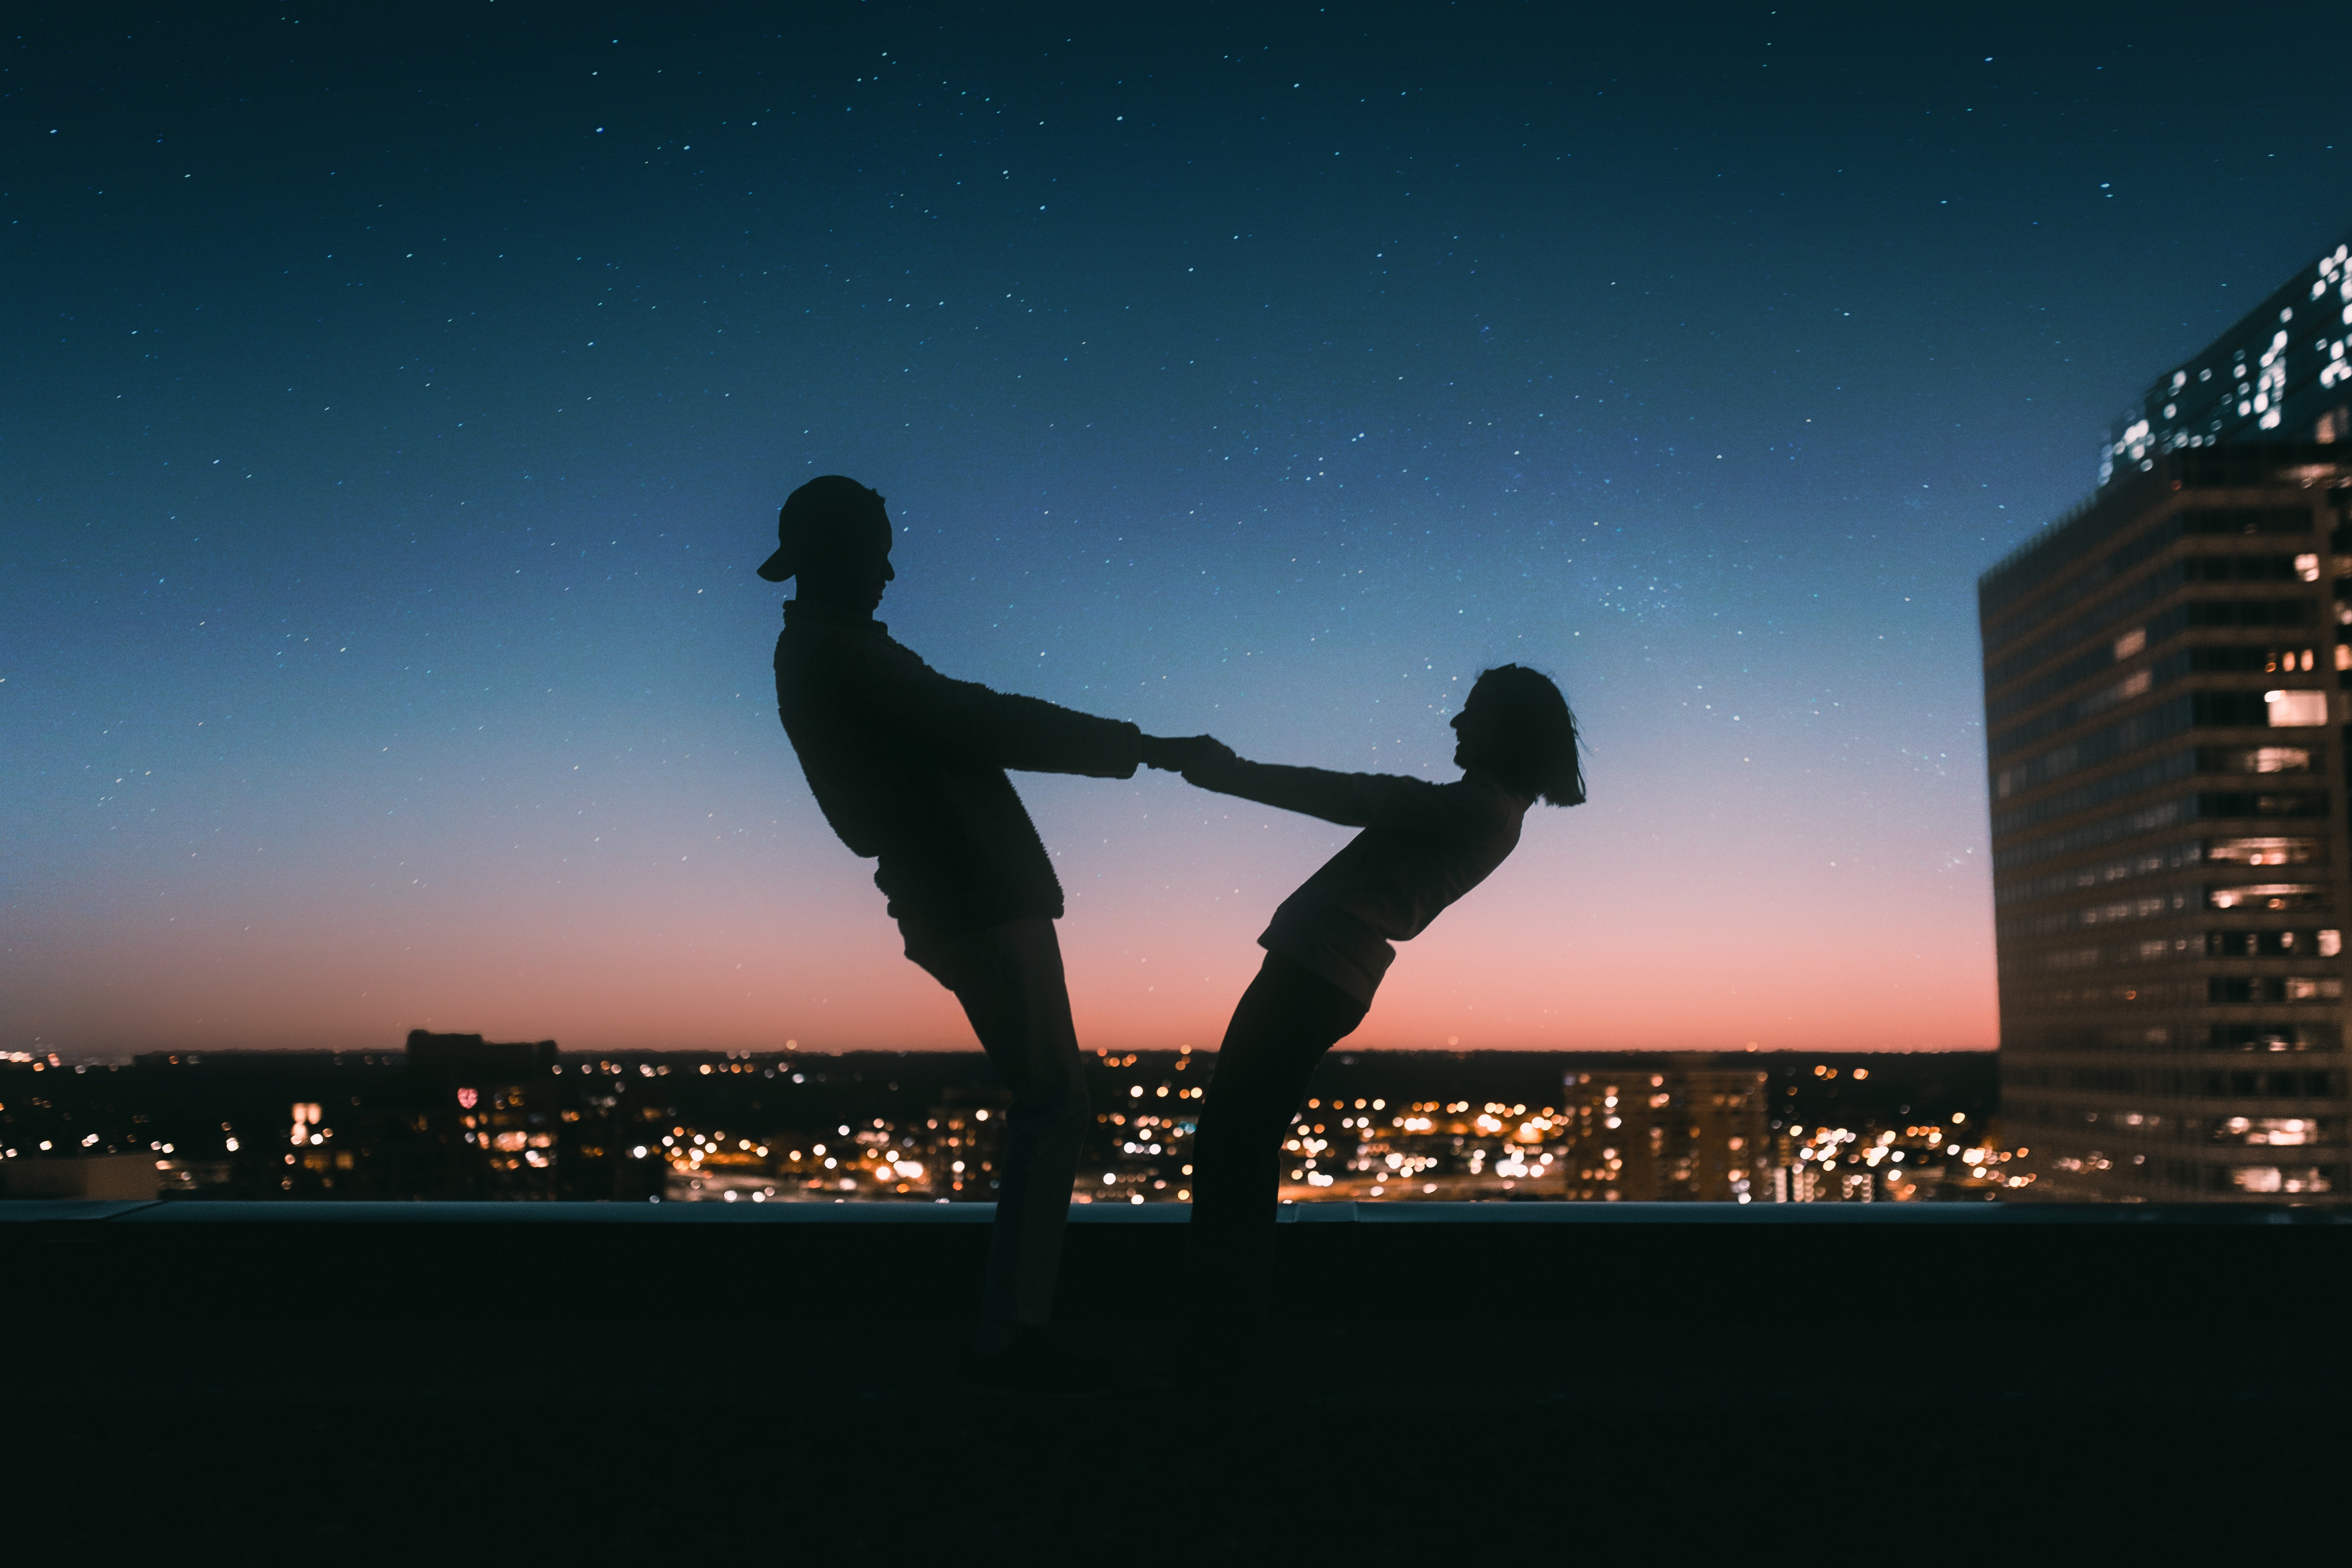 Image of a the silouhette of a man and a woman holding both hands together and leaning back, during dusk.